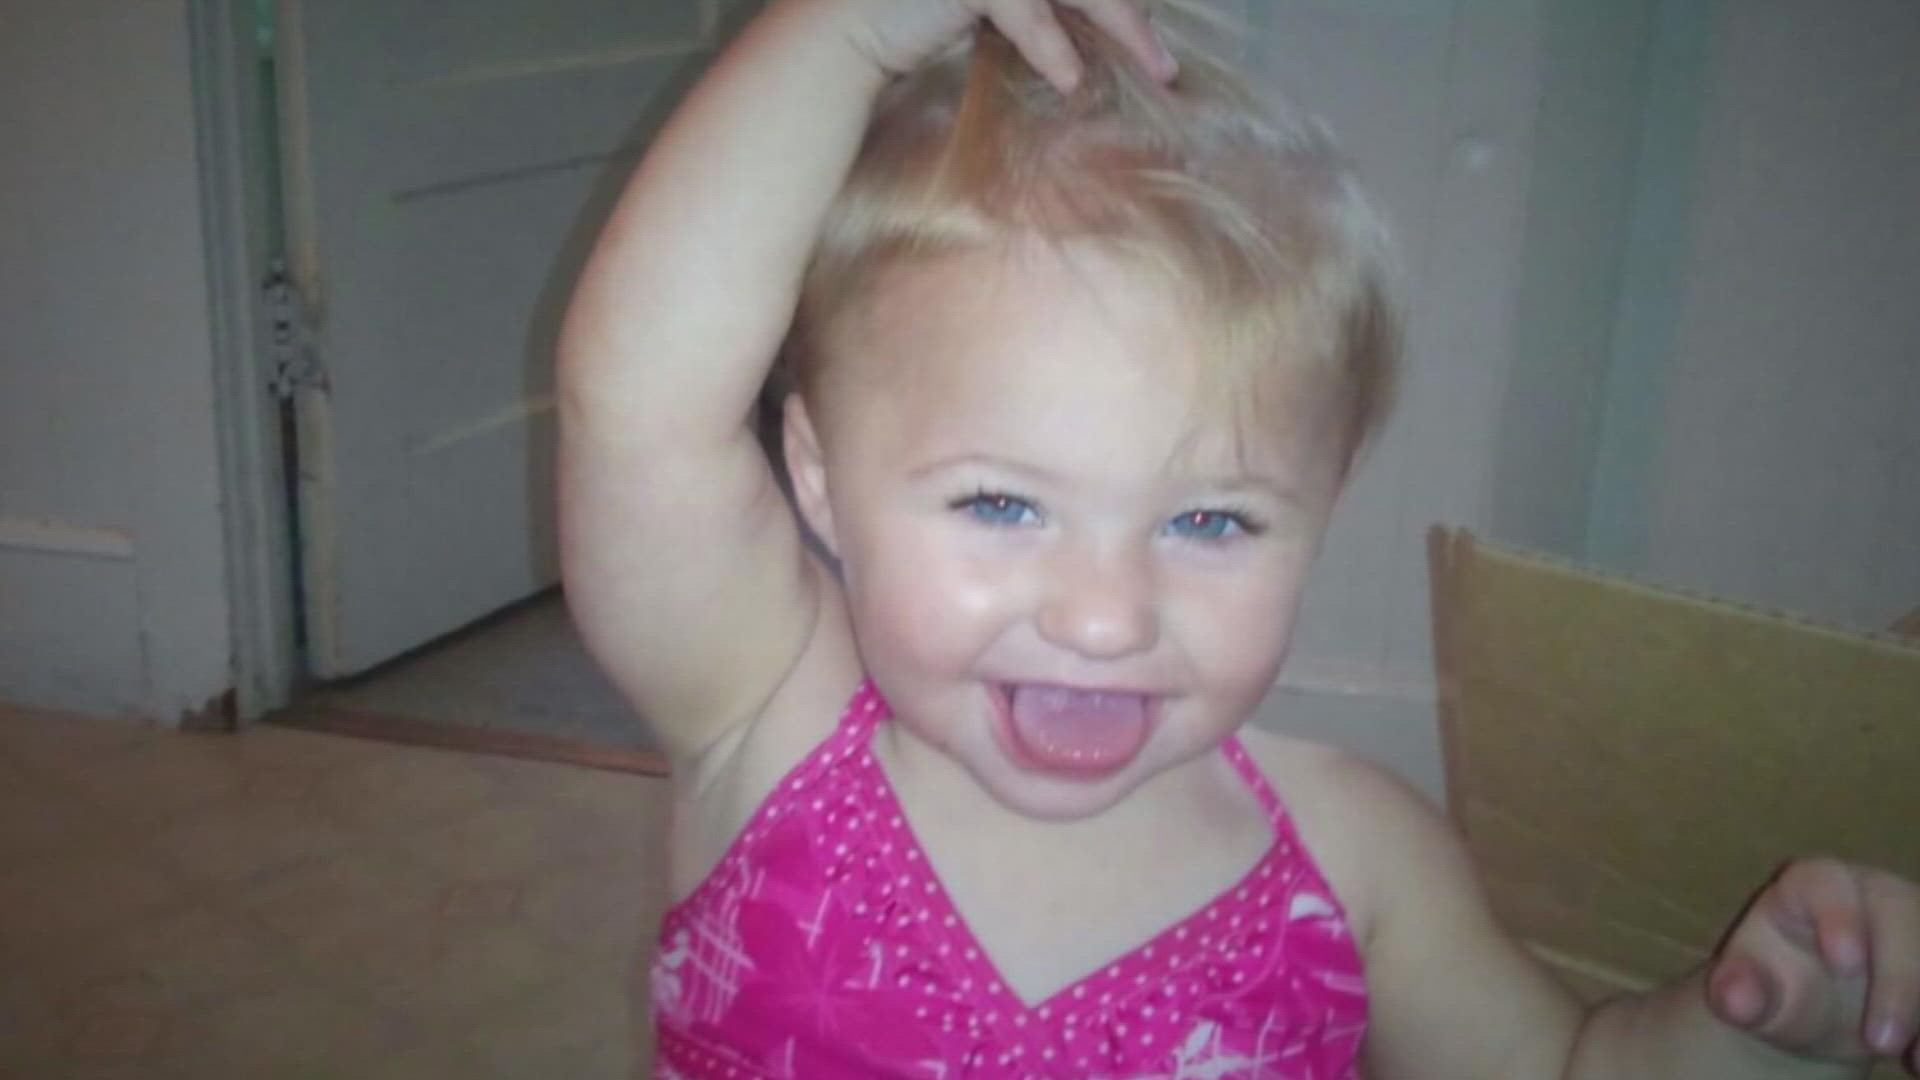 The wrongful death lawsuit against Ayla Reynolds' father now includes Ayla's grandmother and aunt.